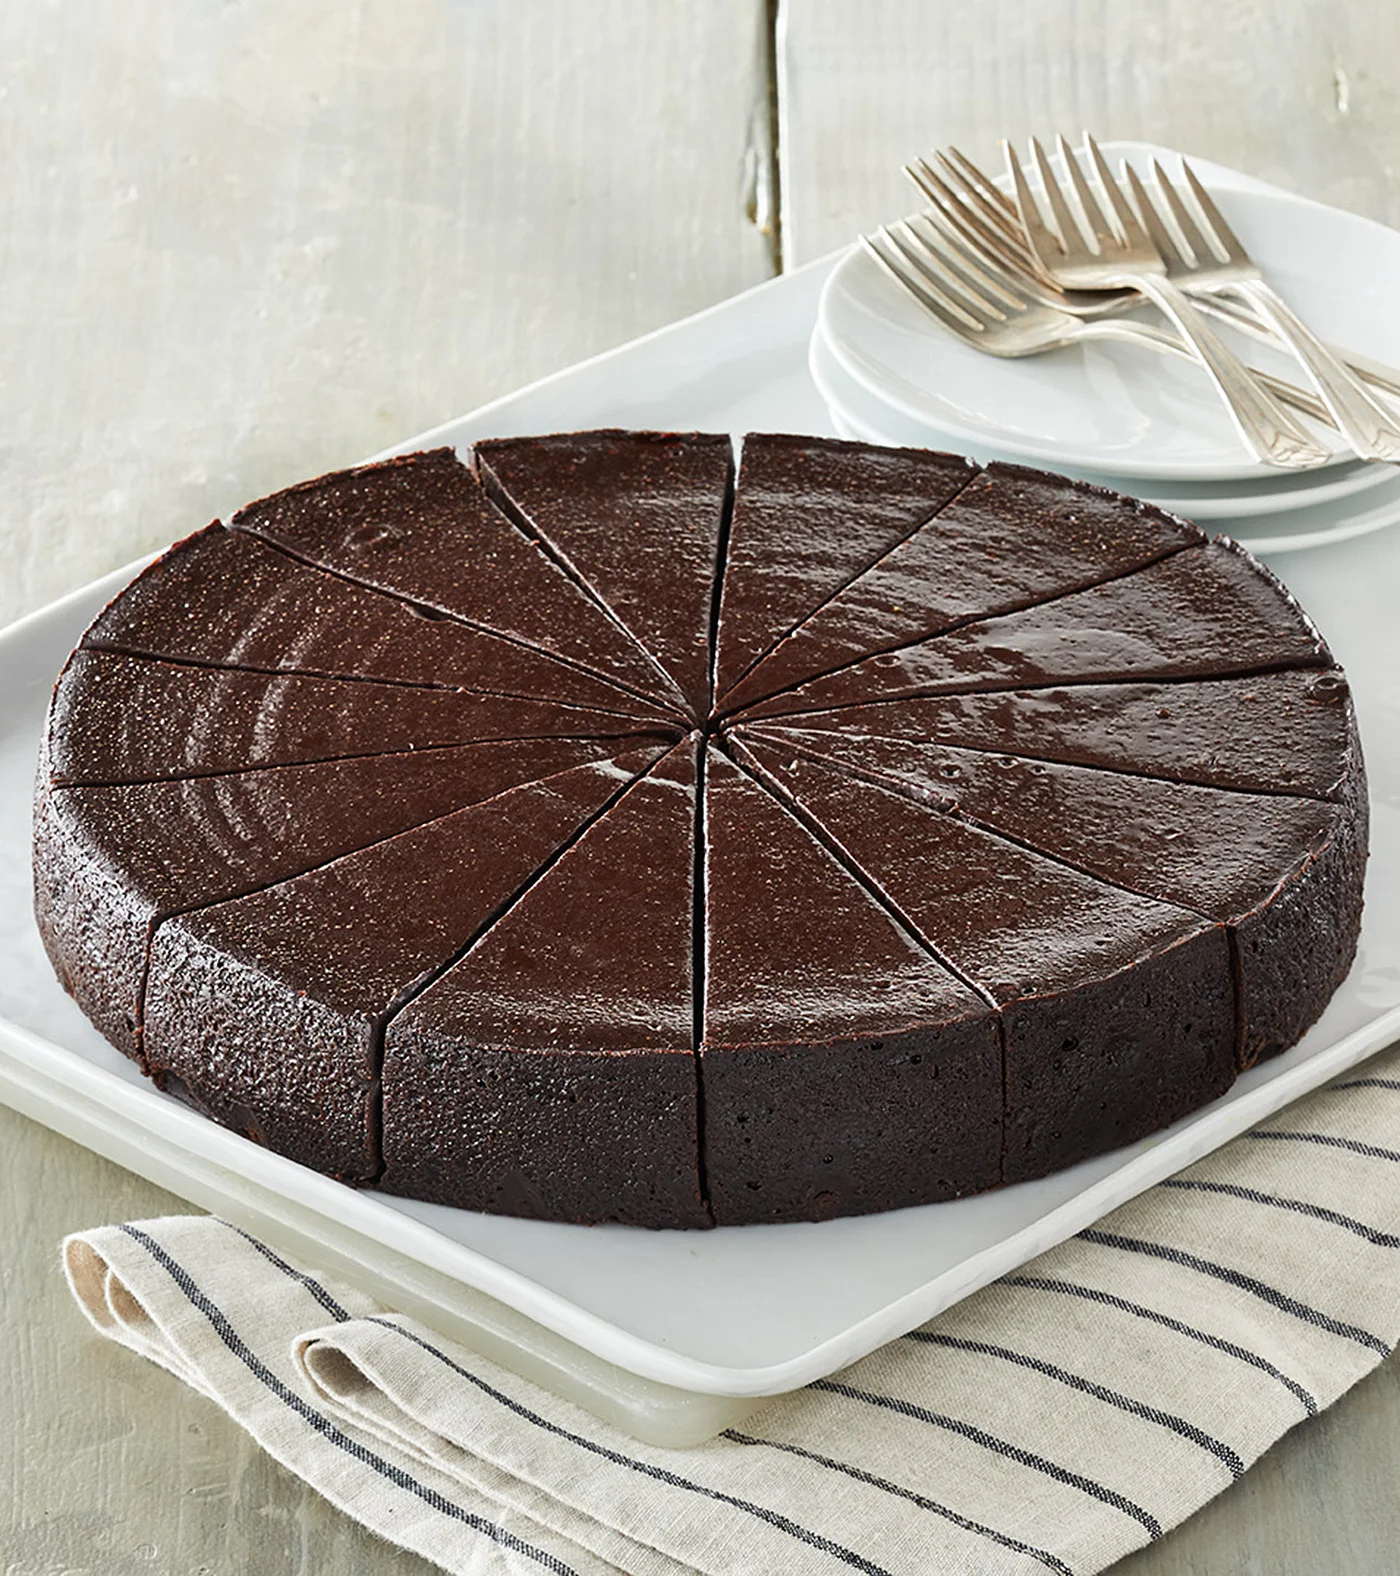 when is passover flourfless chocolate cake